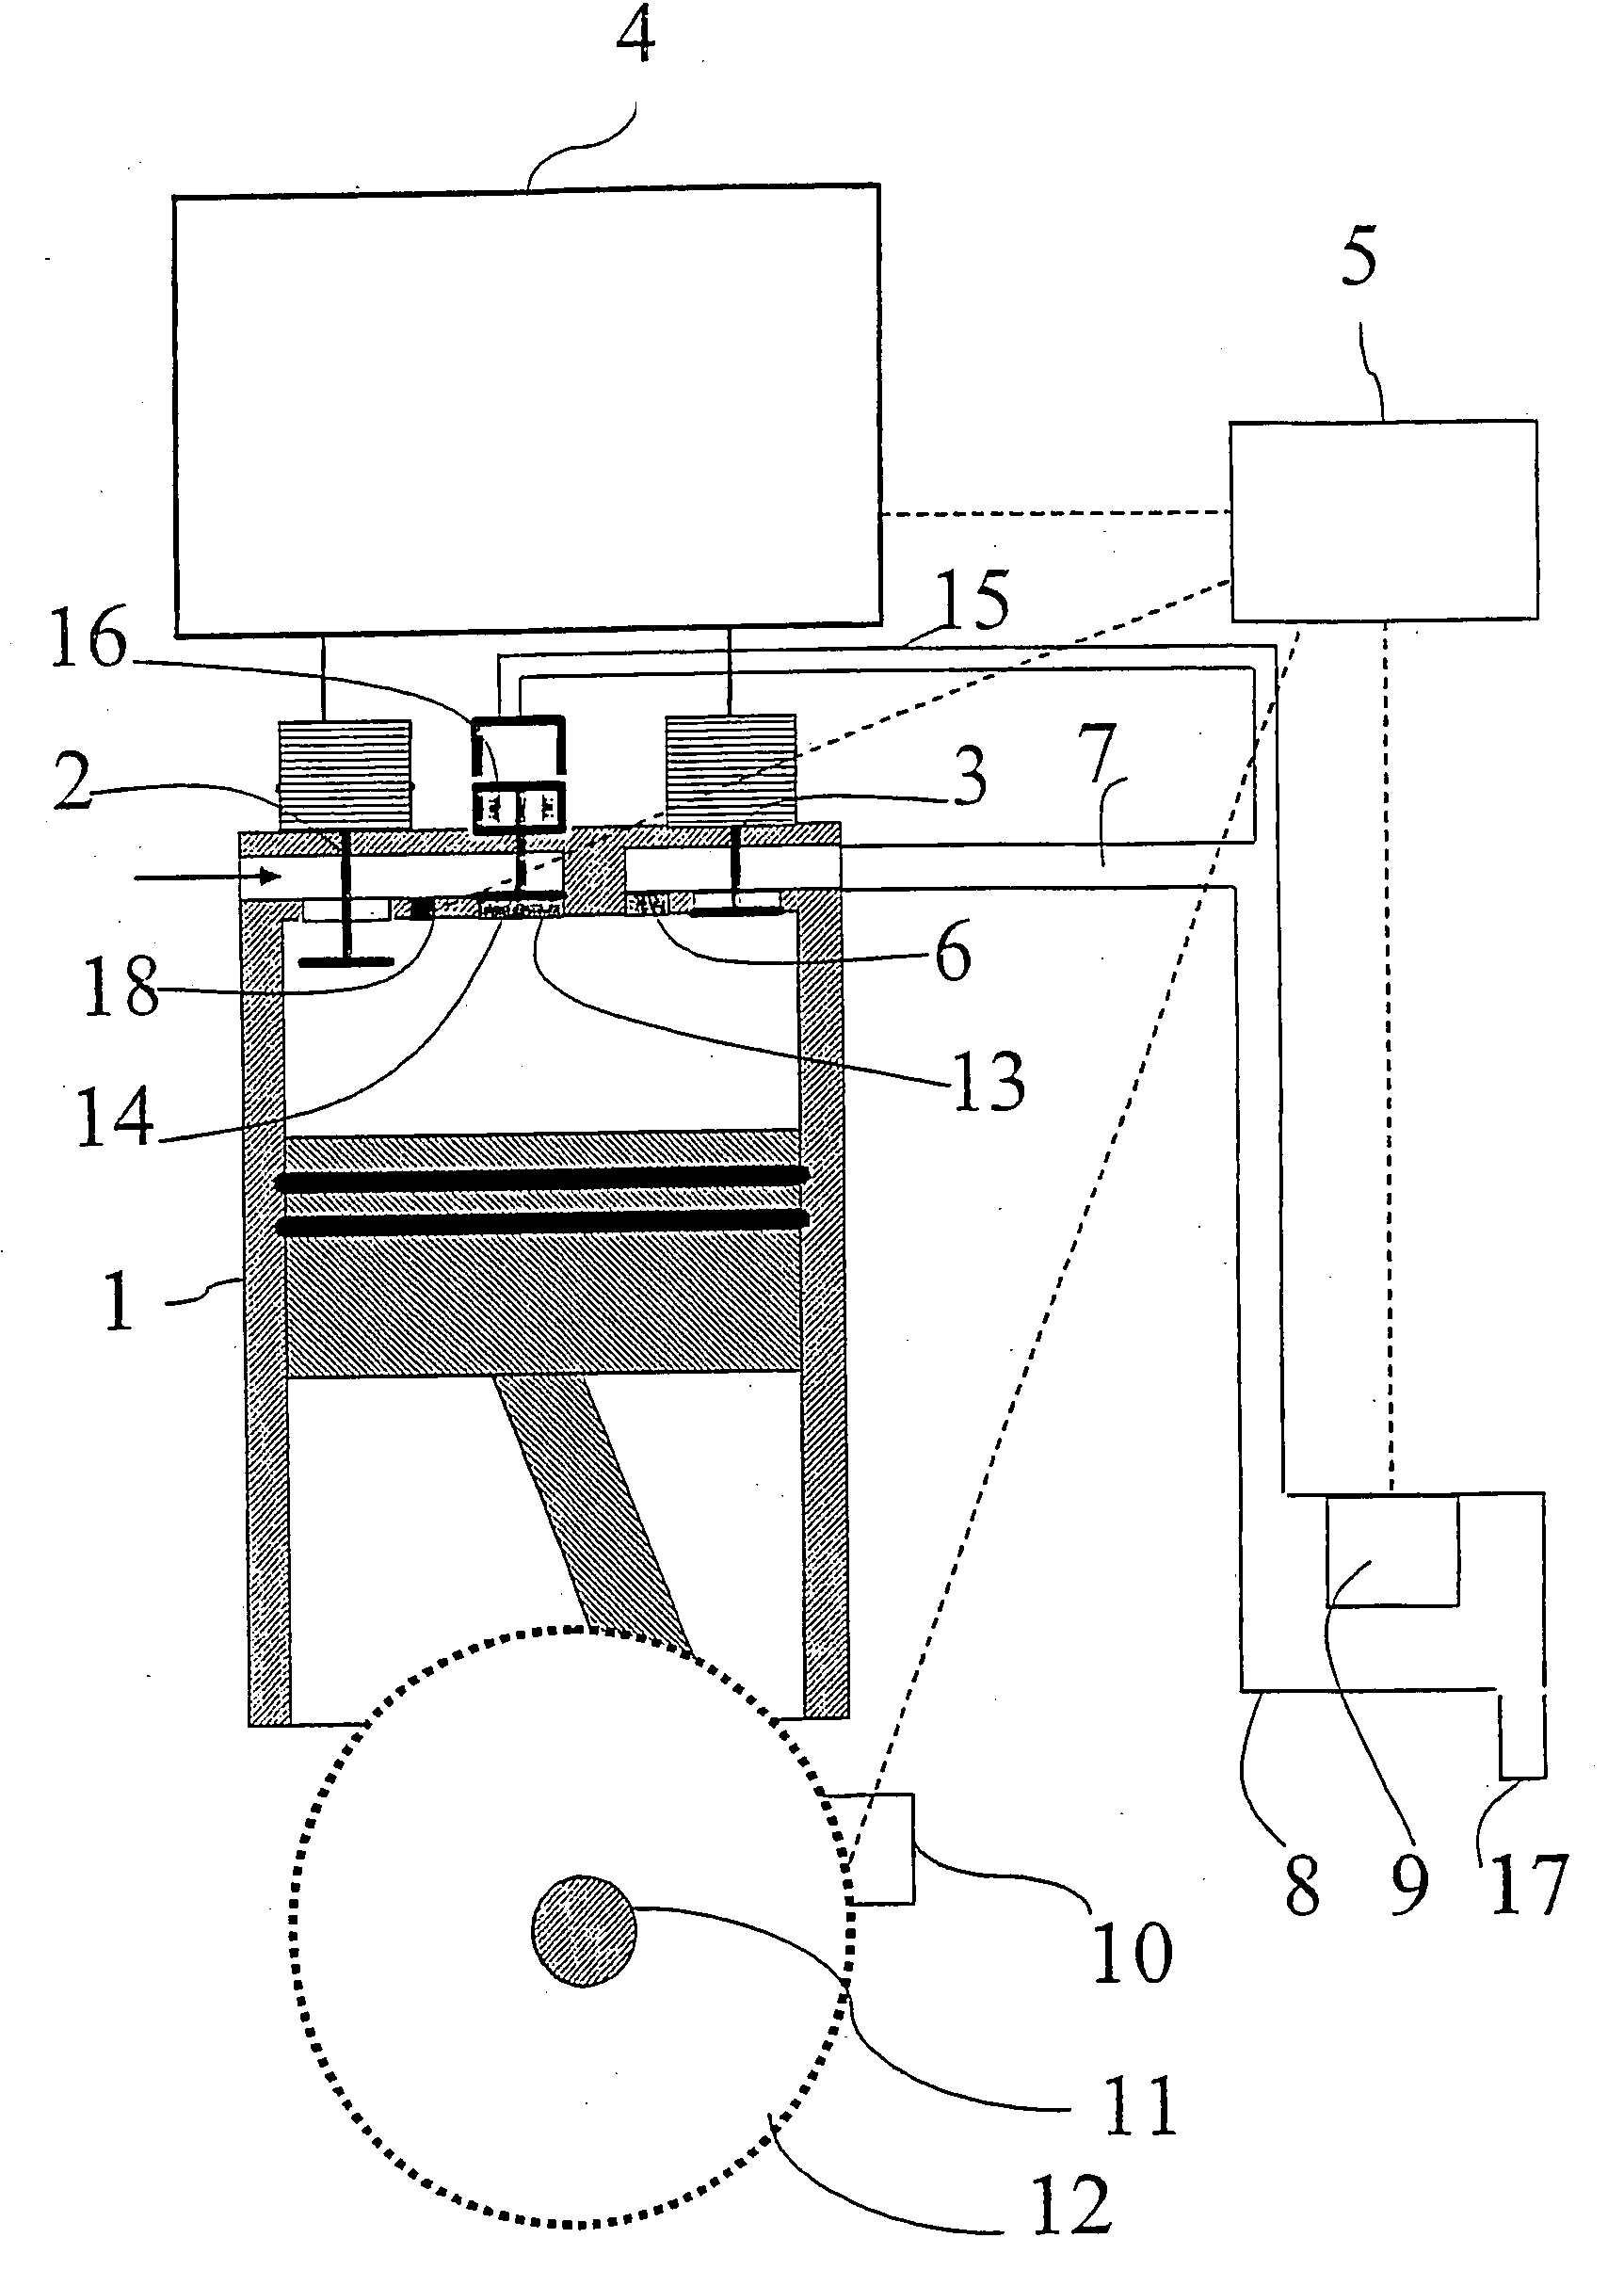 Control method for controlling the gas flow in a compressor